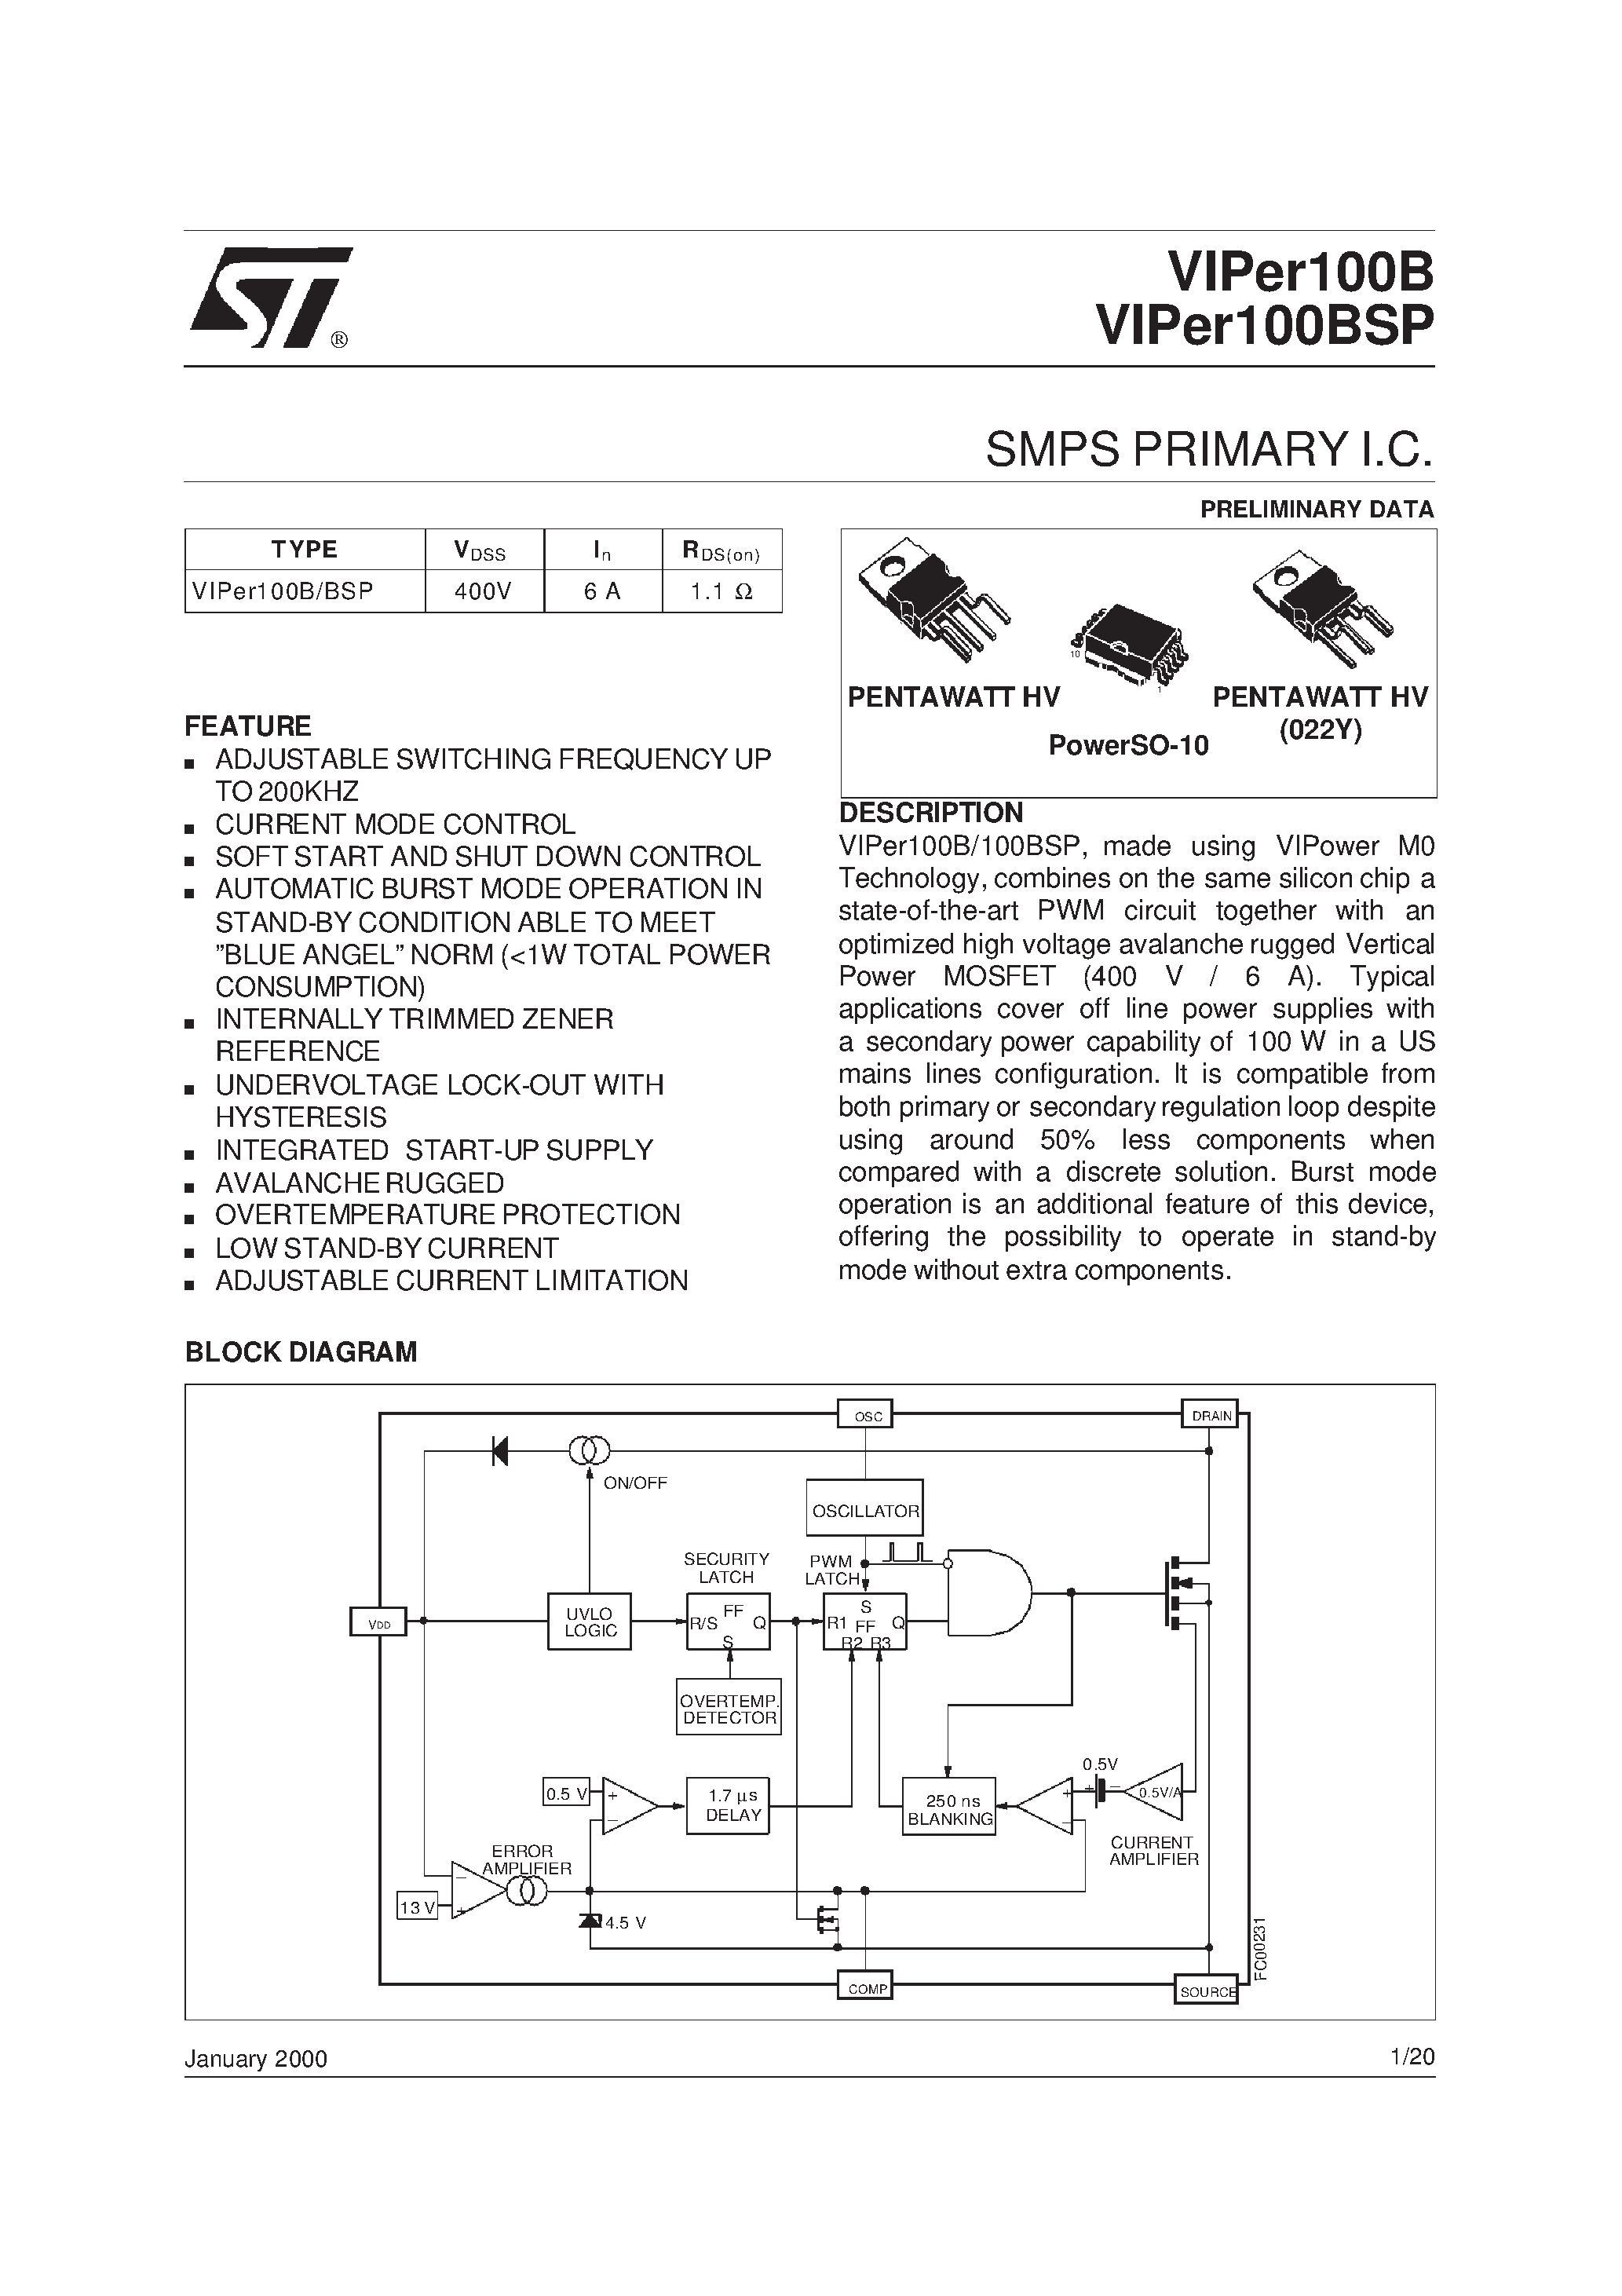 Datasheet VIPER100B - SMPS PRIMARY I.C. page 1